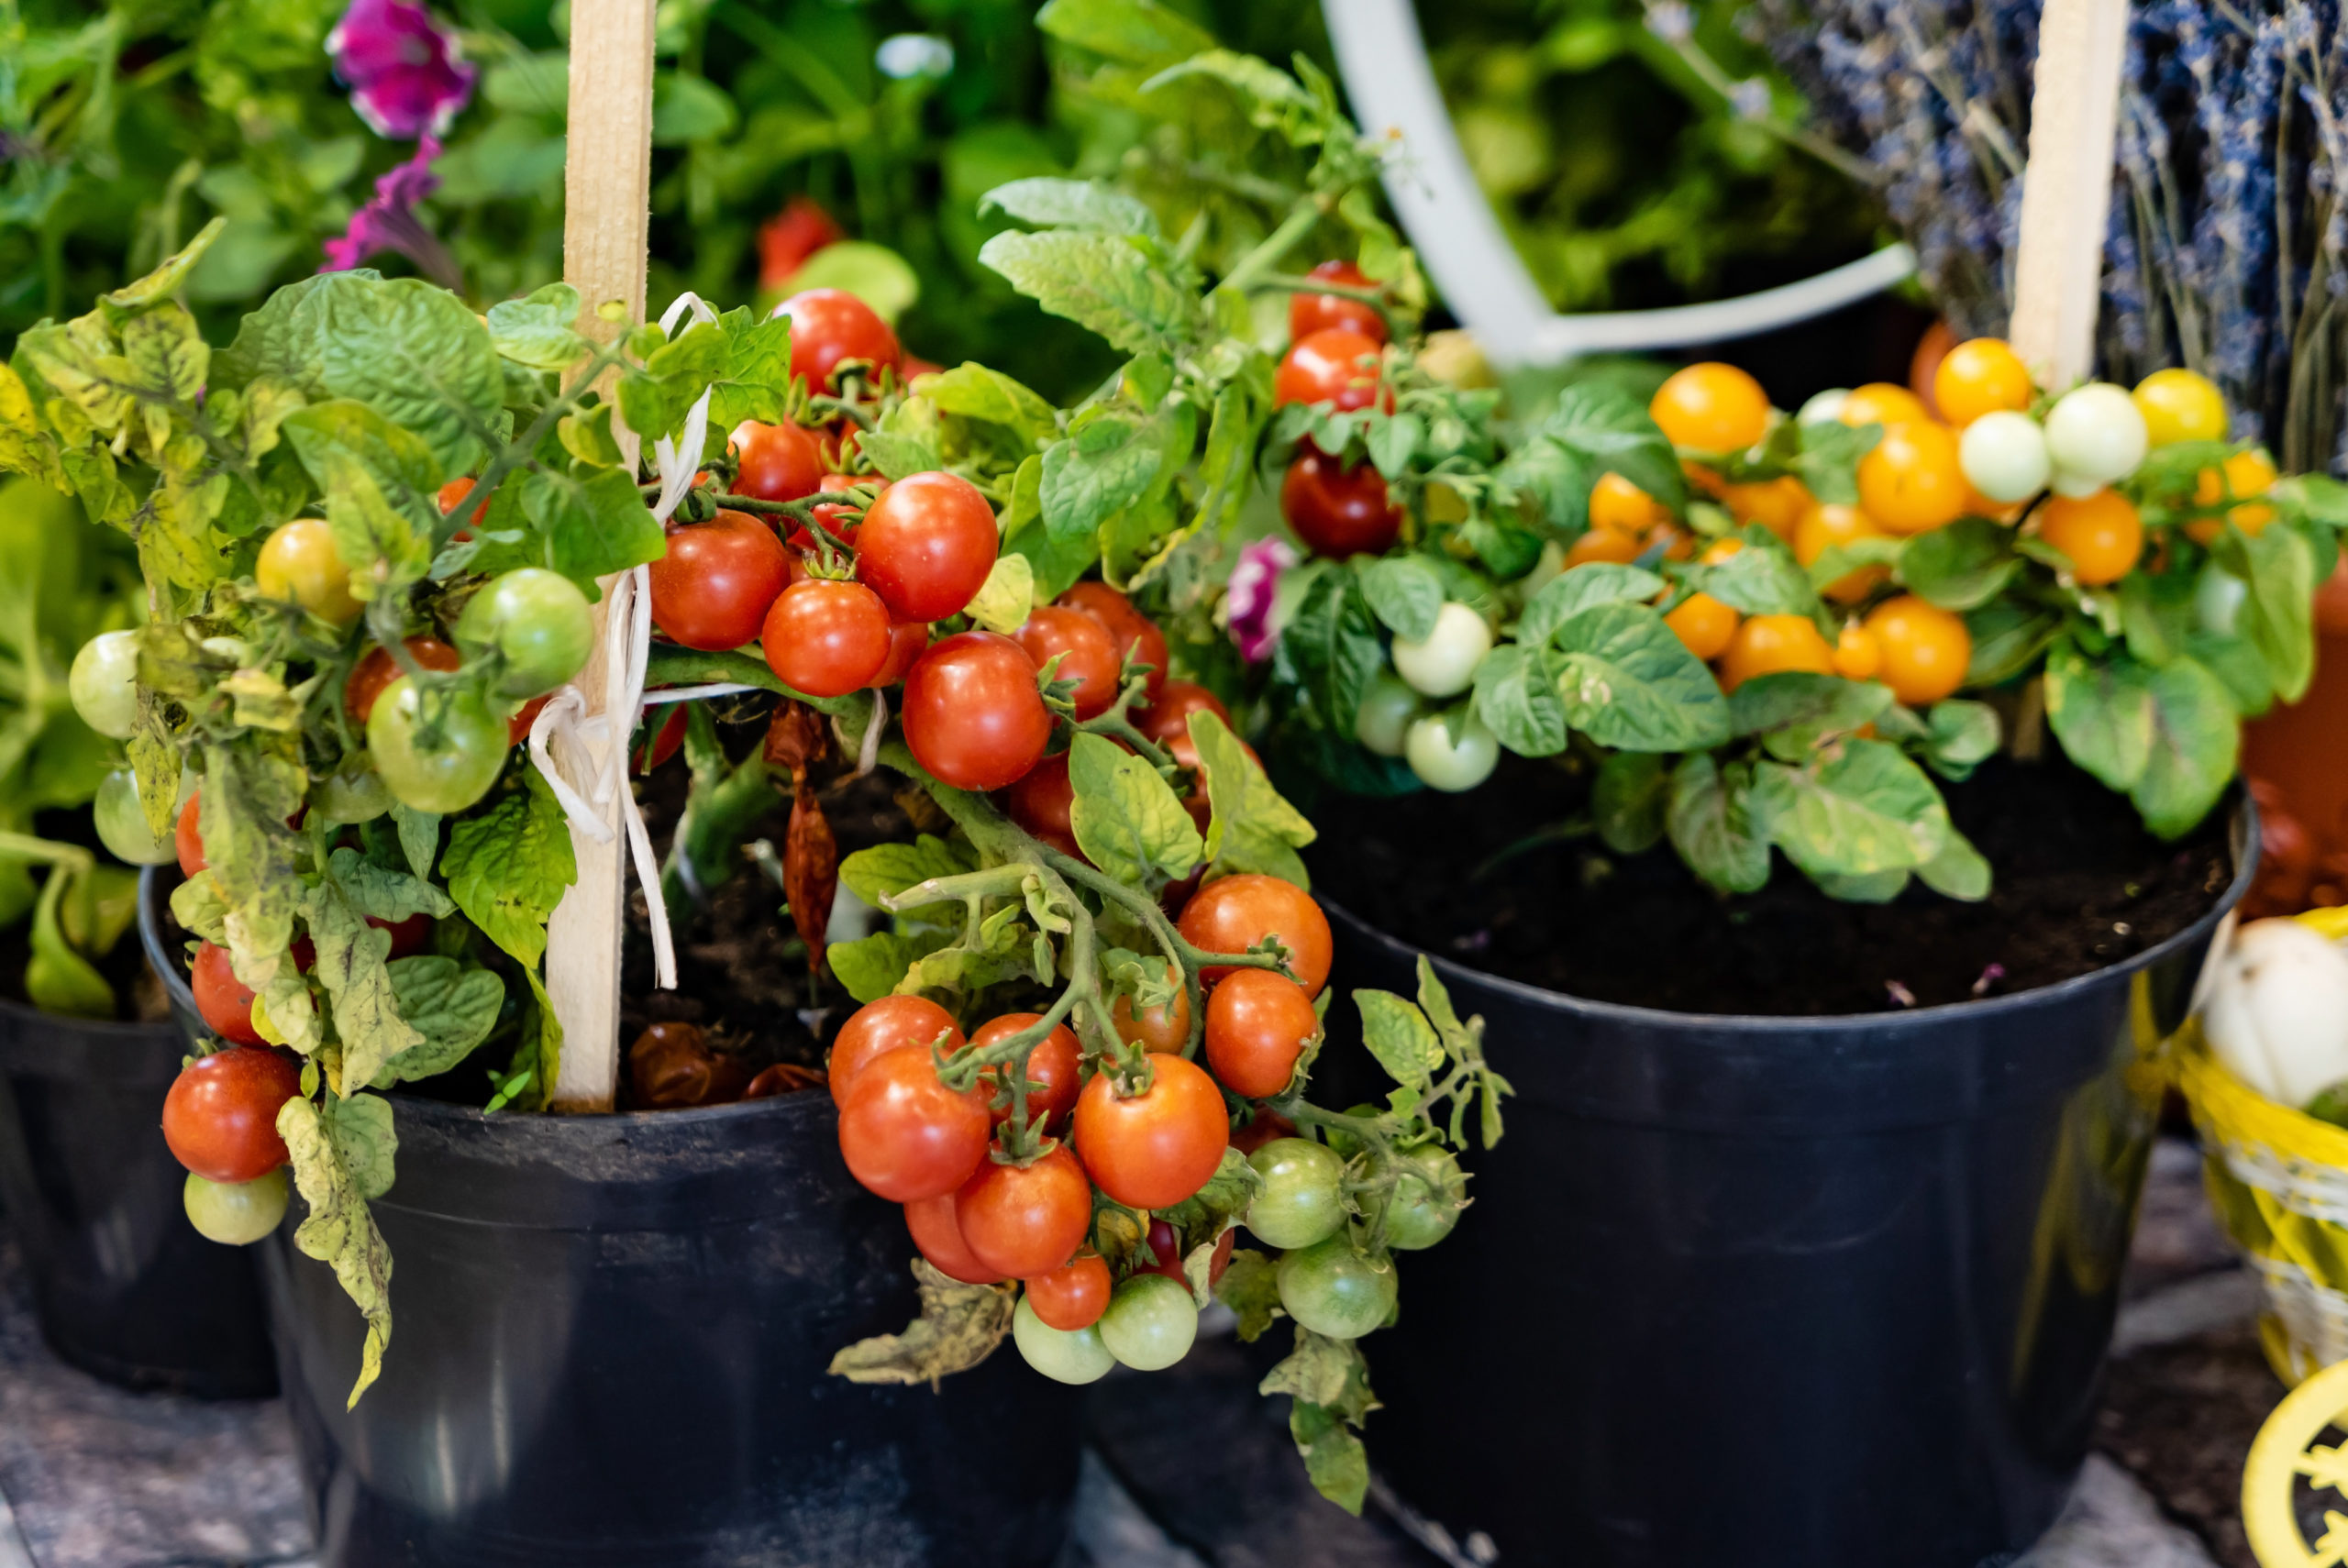 Growing tomatoes: Follow these tips to harvest large ripe tomatoes